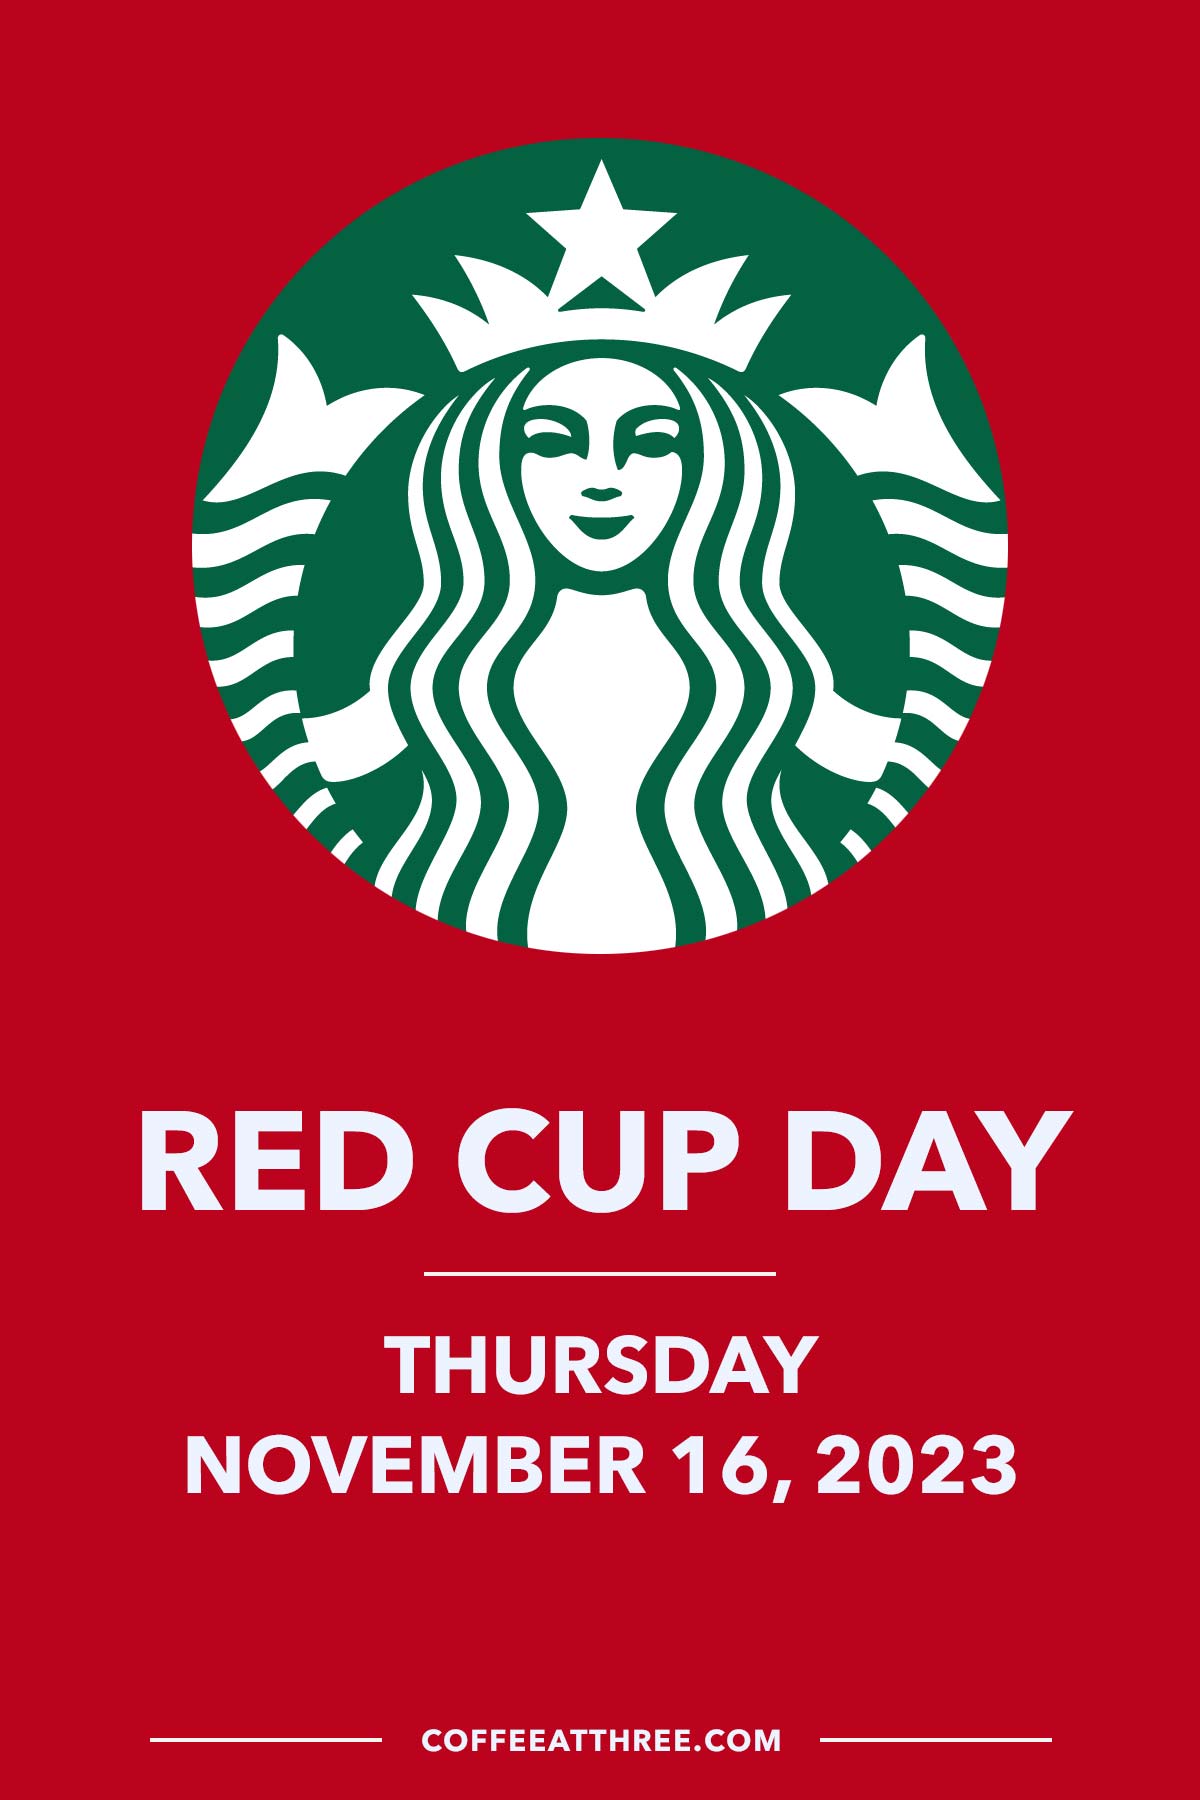 Red Cup Day text with Starbucks logo.